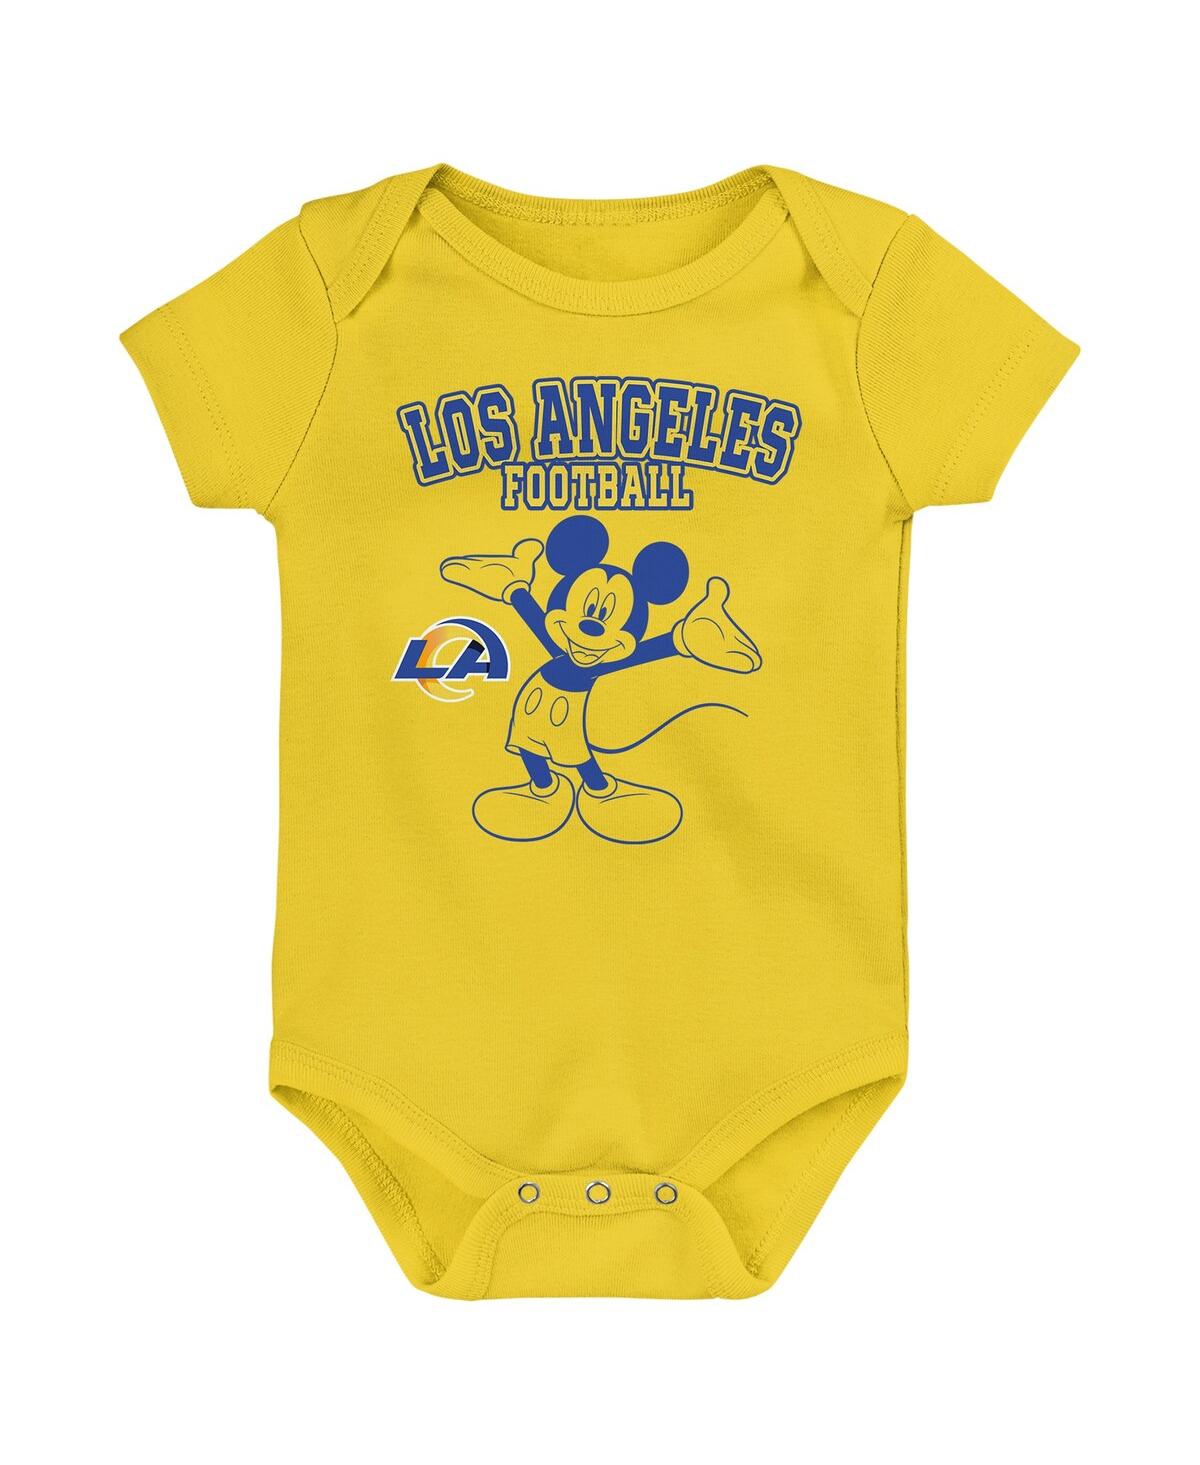 Shop Outerstuff Baby Boys And Girls Royal, Gold, Gray Los Angeles Rams Three-piece Disney Game Time Bodysuit Set In Royal,gold